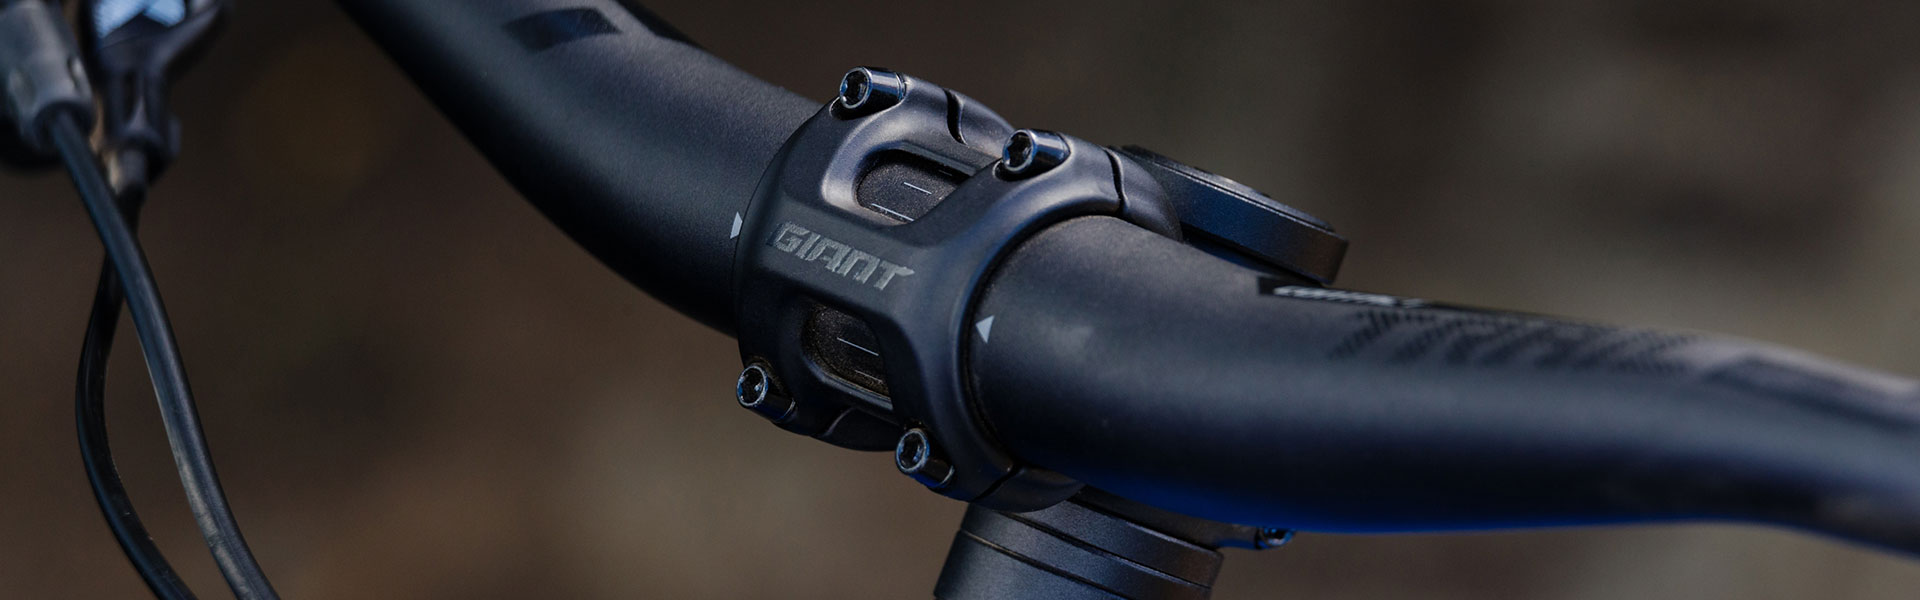 Components | Giant Bicycles